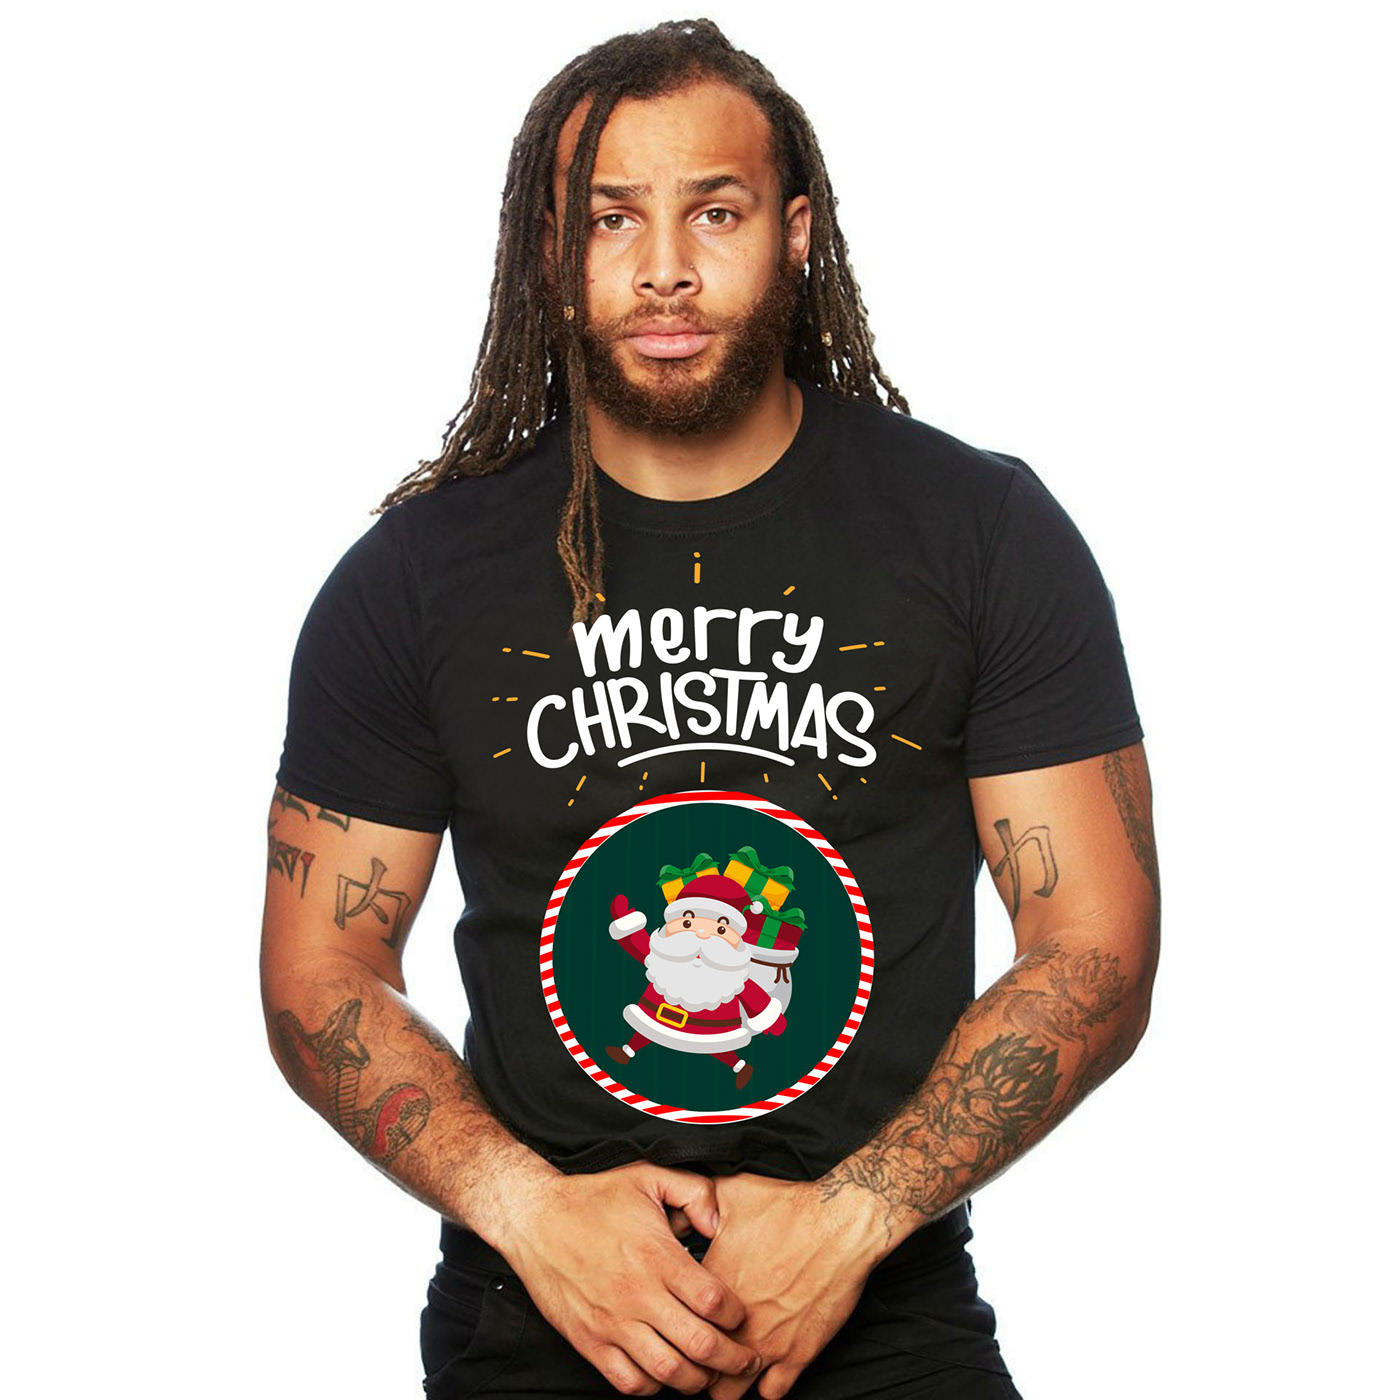 Download Christmas T-Shirt Design with Free Mockup on Behance